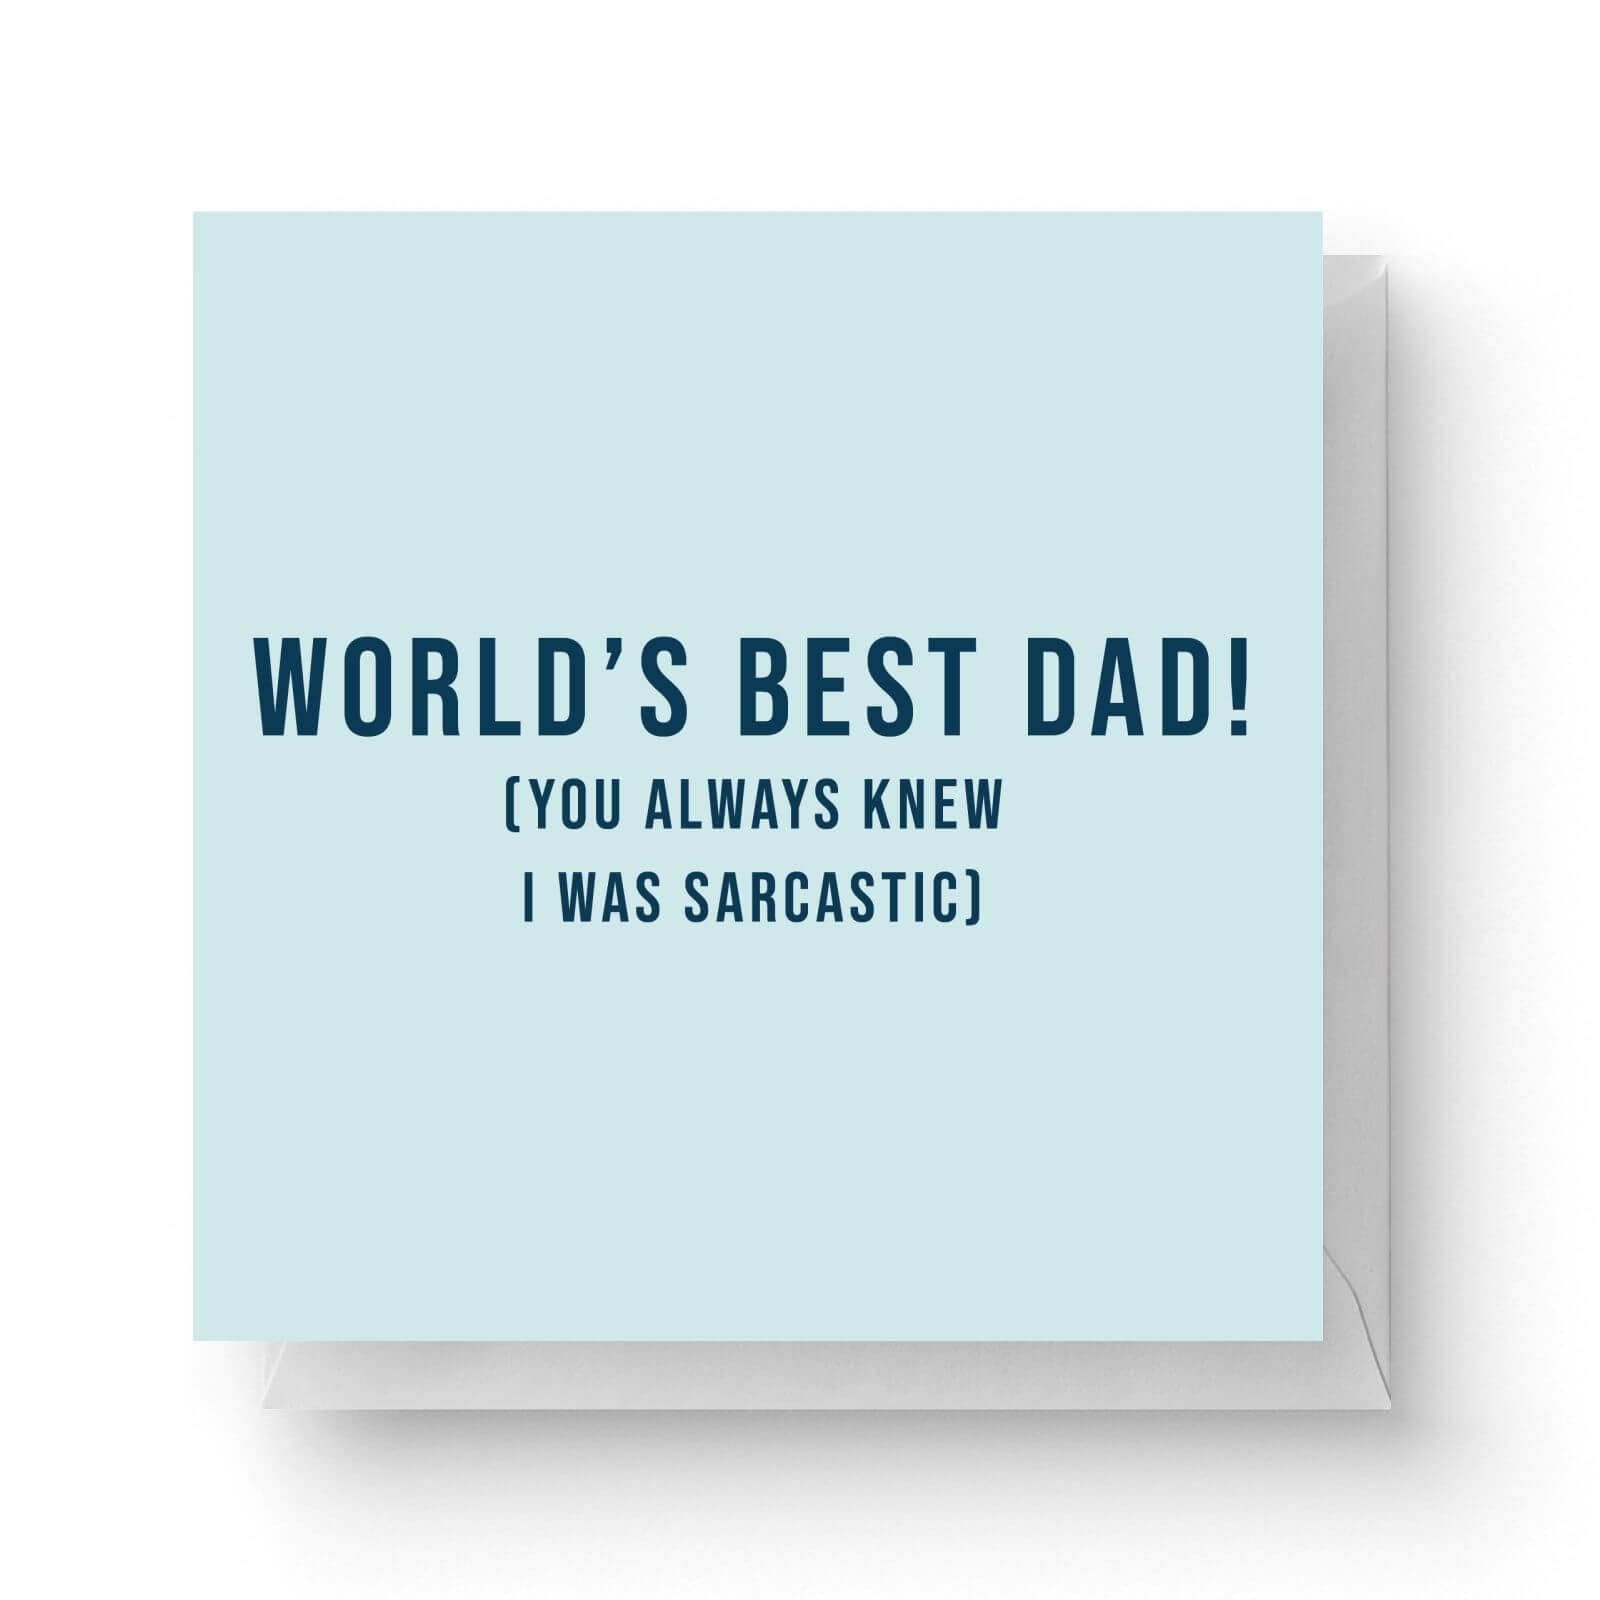 Image of World's Best Dad! (You Always New I Was Sarcastic) Square Greetings Card (14.8cm x 14.8cm)